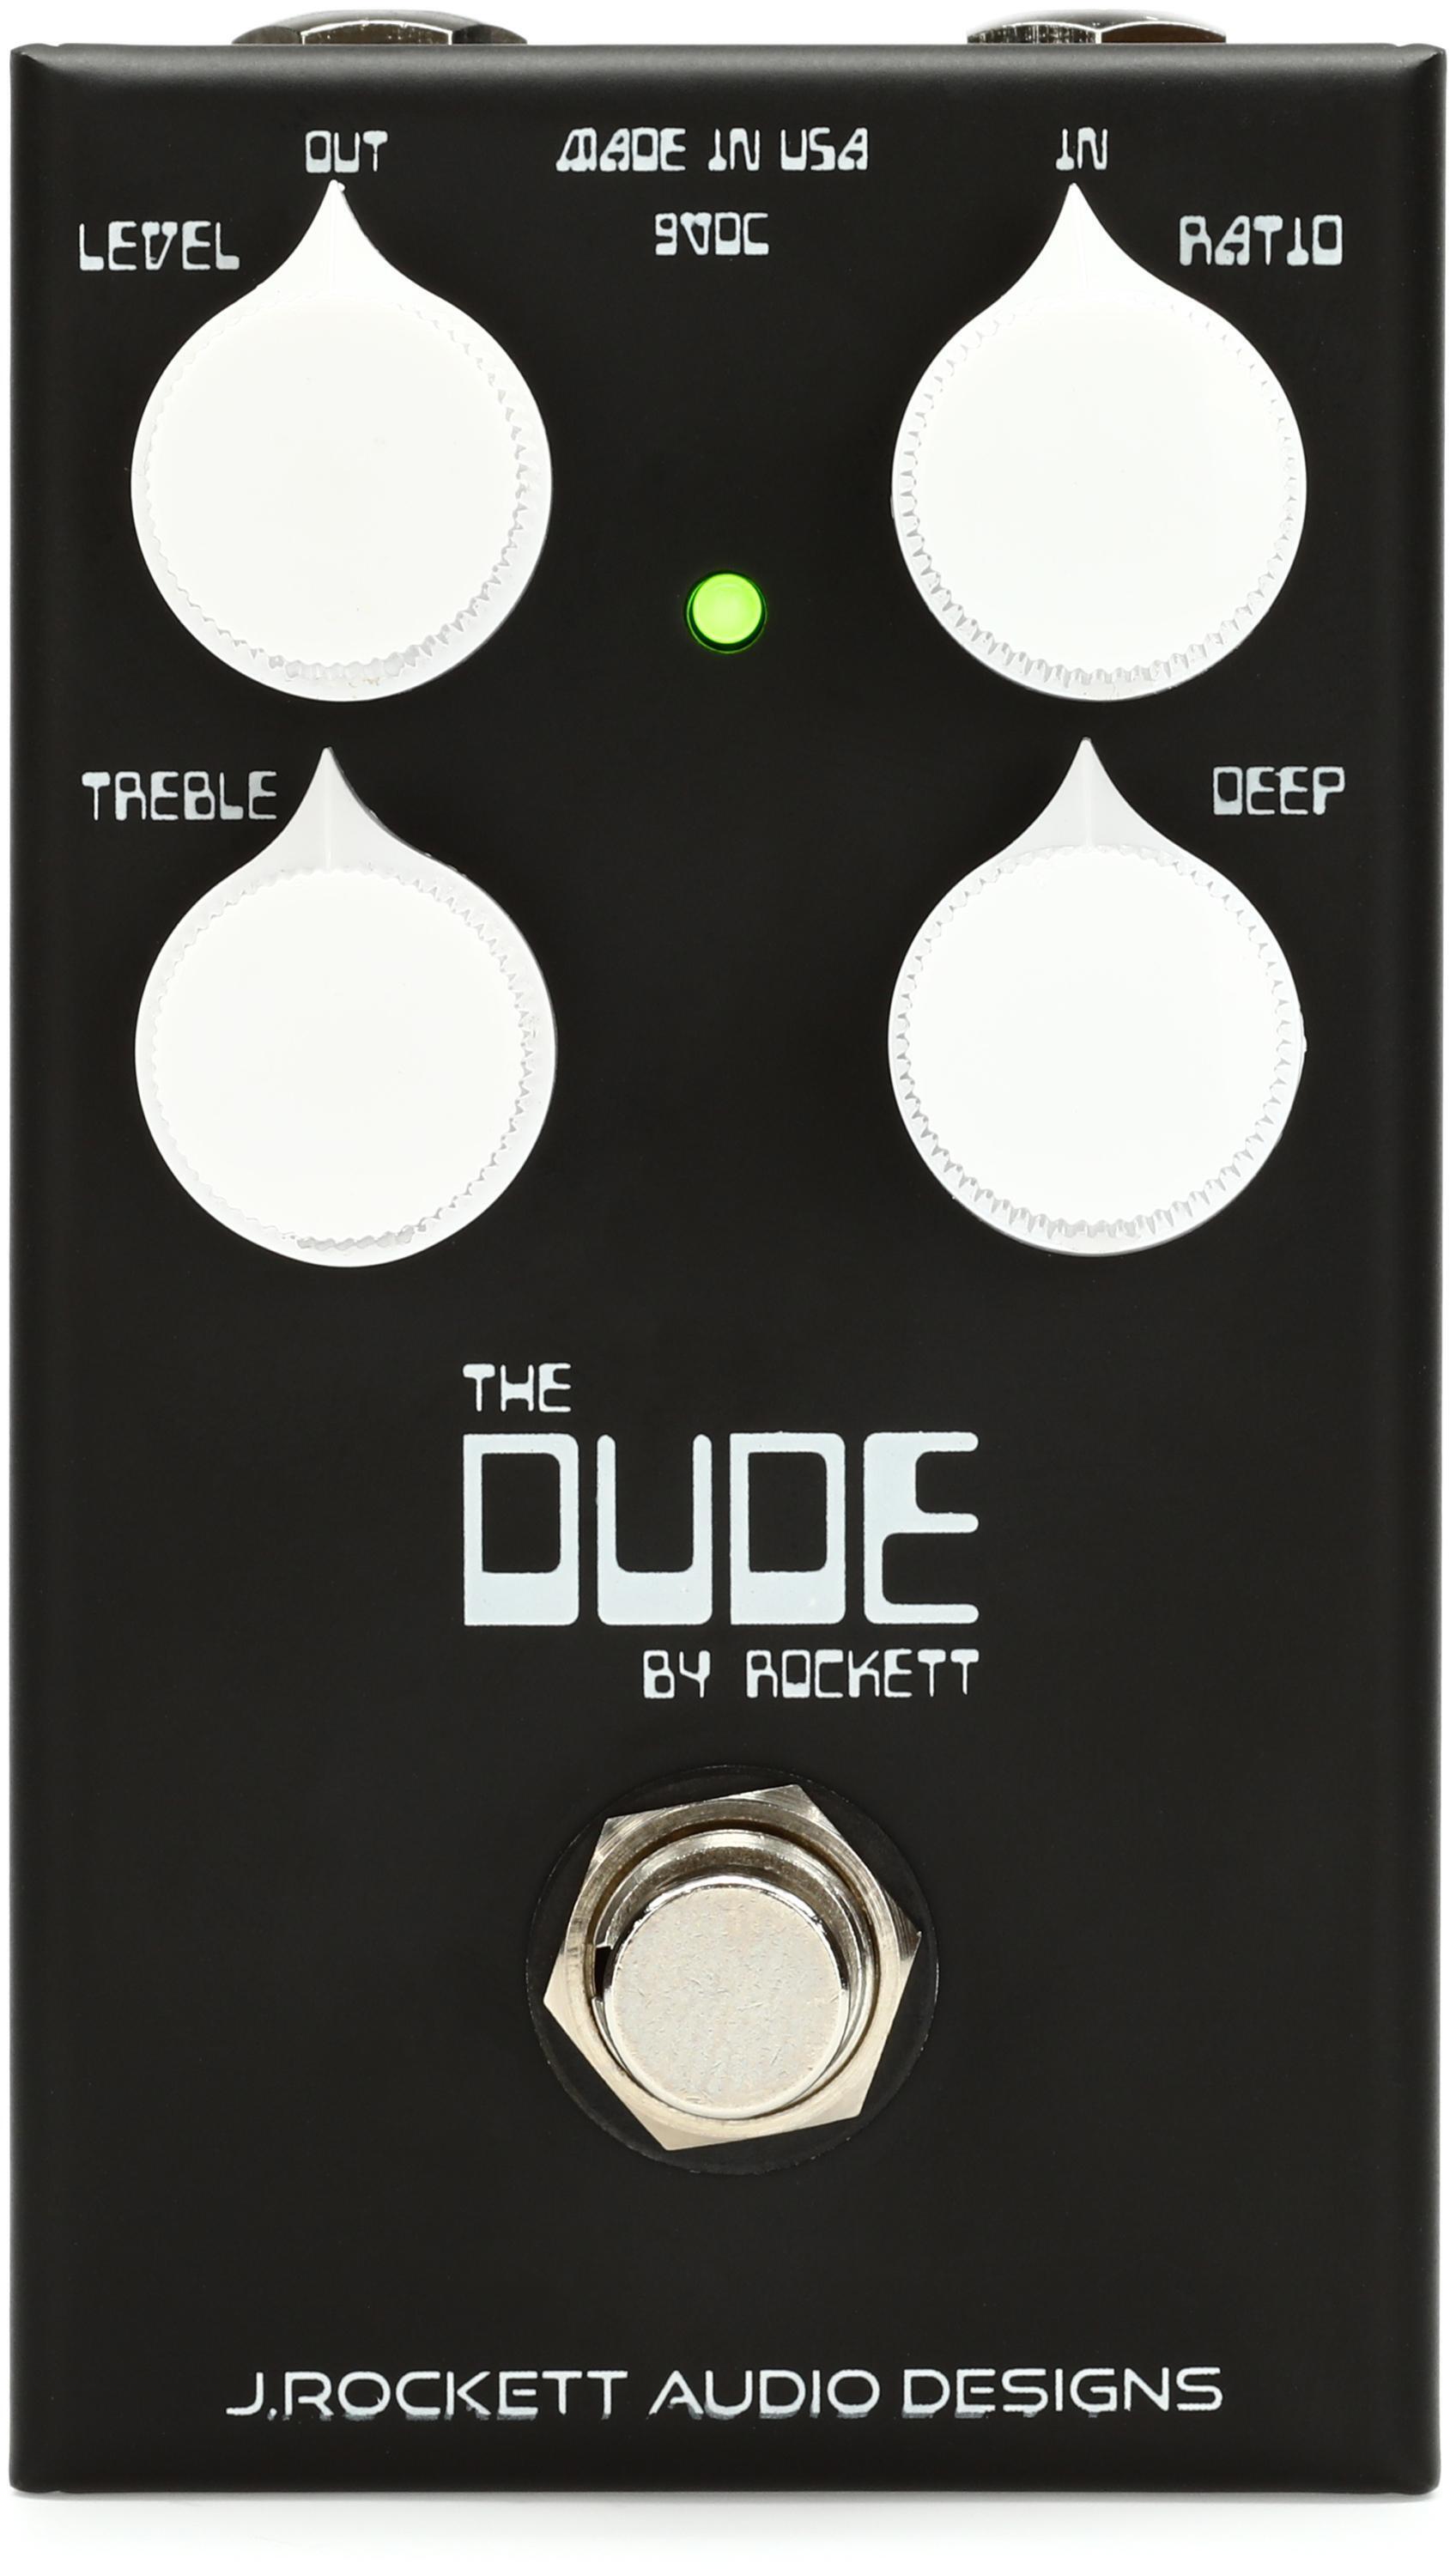 Pedal　Boost/Overdrive　Designs　Dude　Audio　The　Rockett　J.　Sweetwater